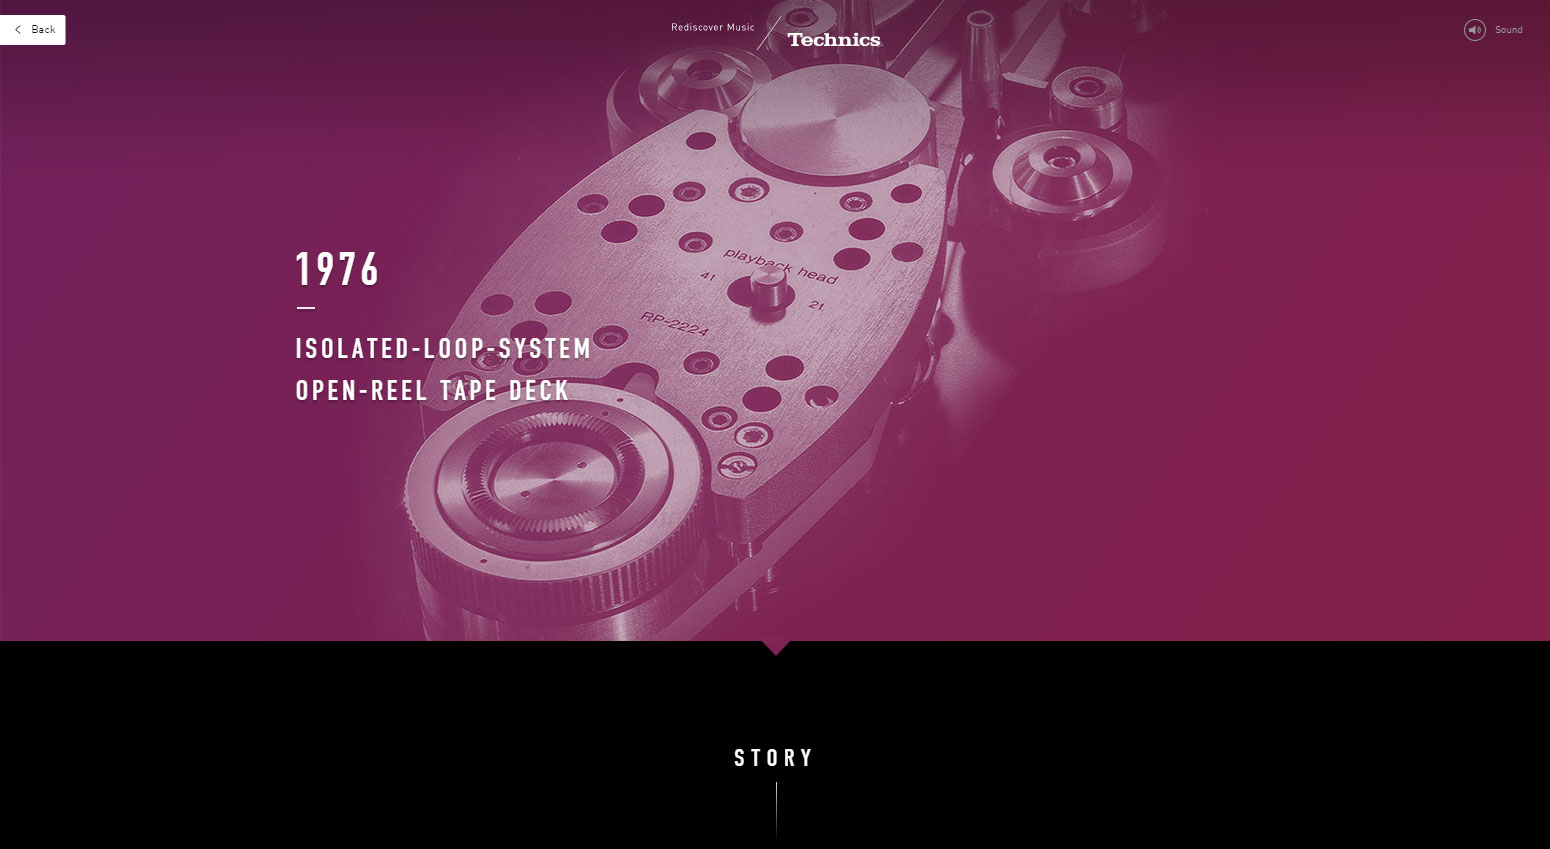 Technics 50th Anniversary - Website of the Day